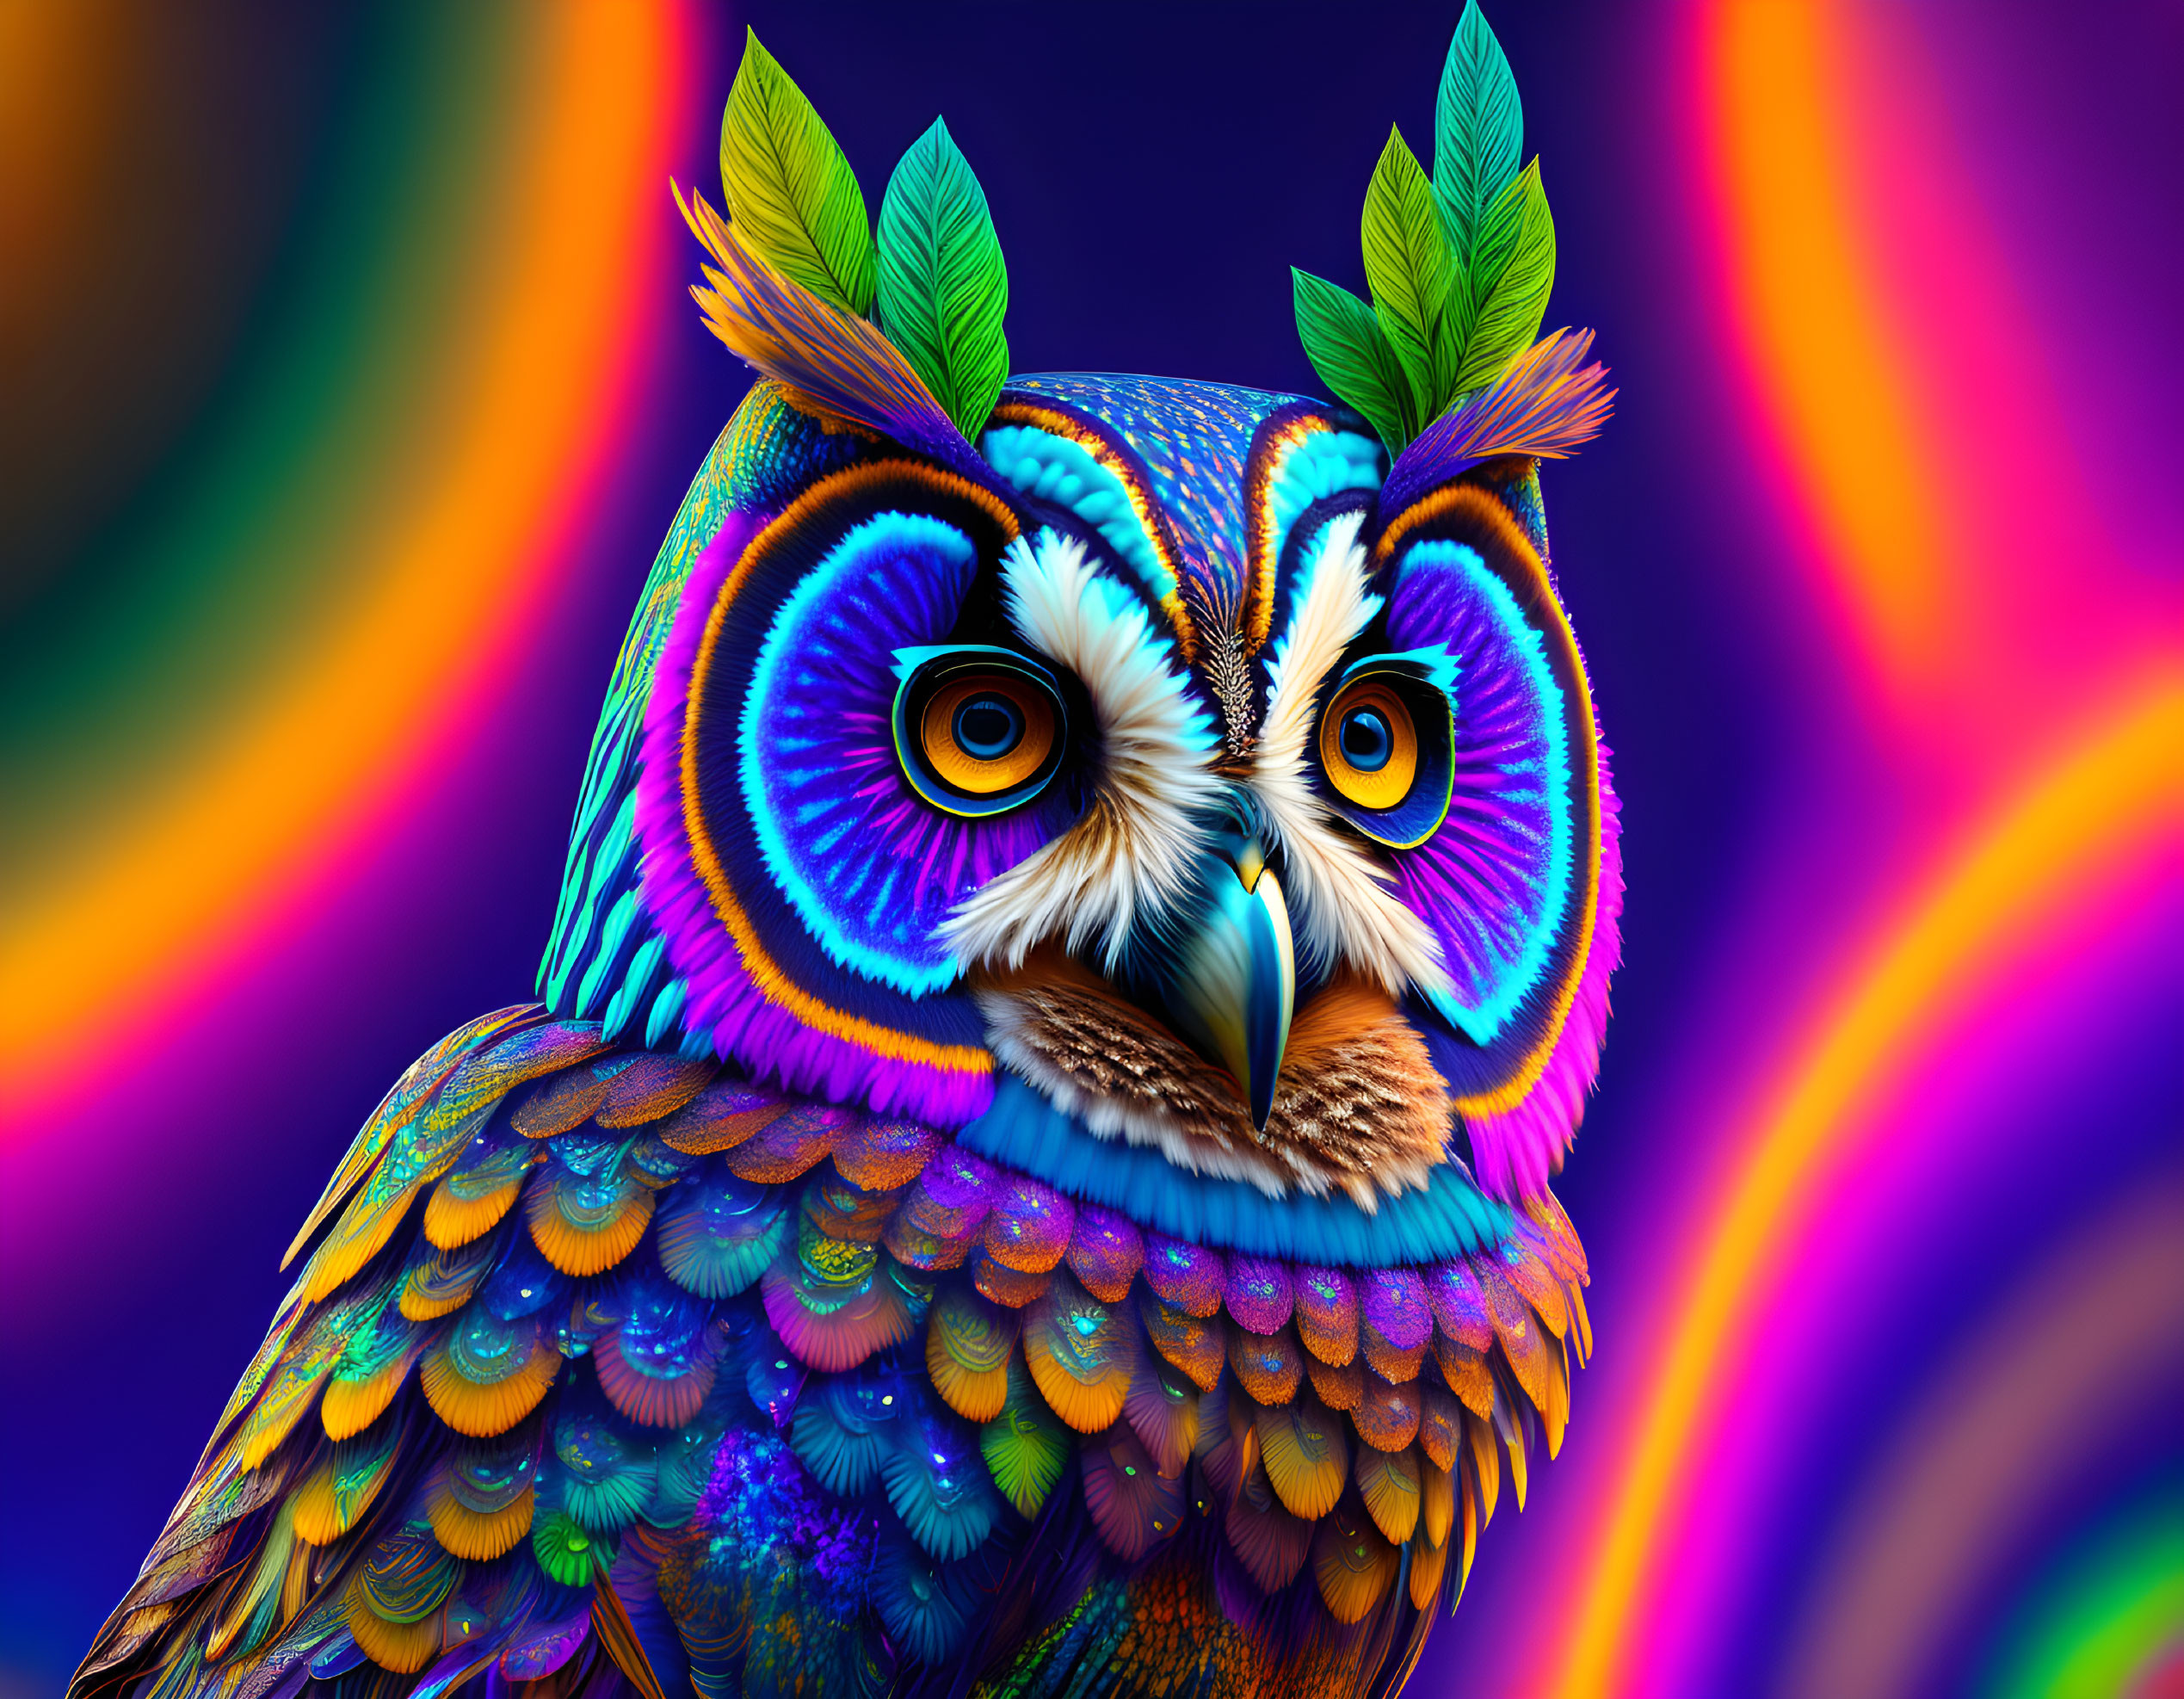 Colorful Owl Art with Patterned Plumage and Leaf-like Feathers on Swirling Background